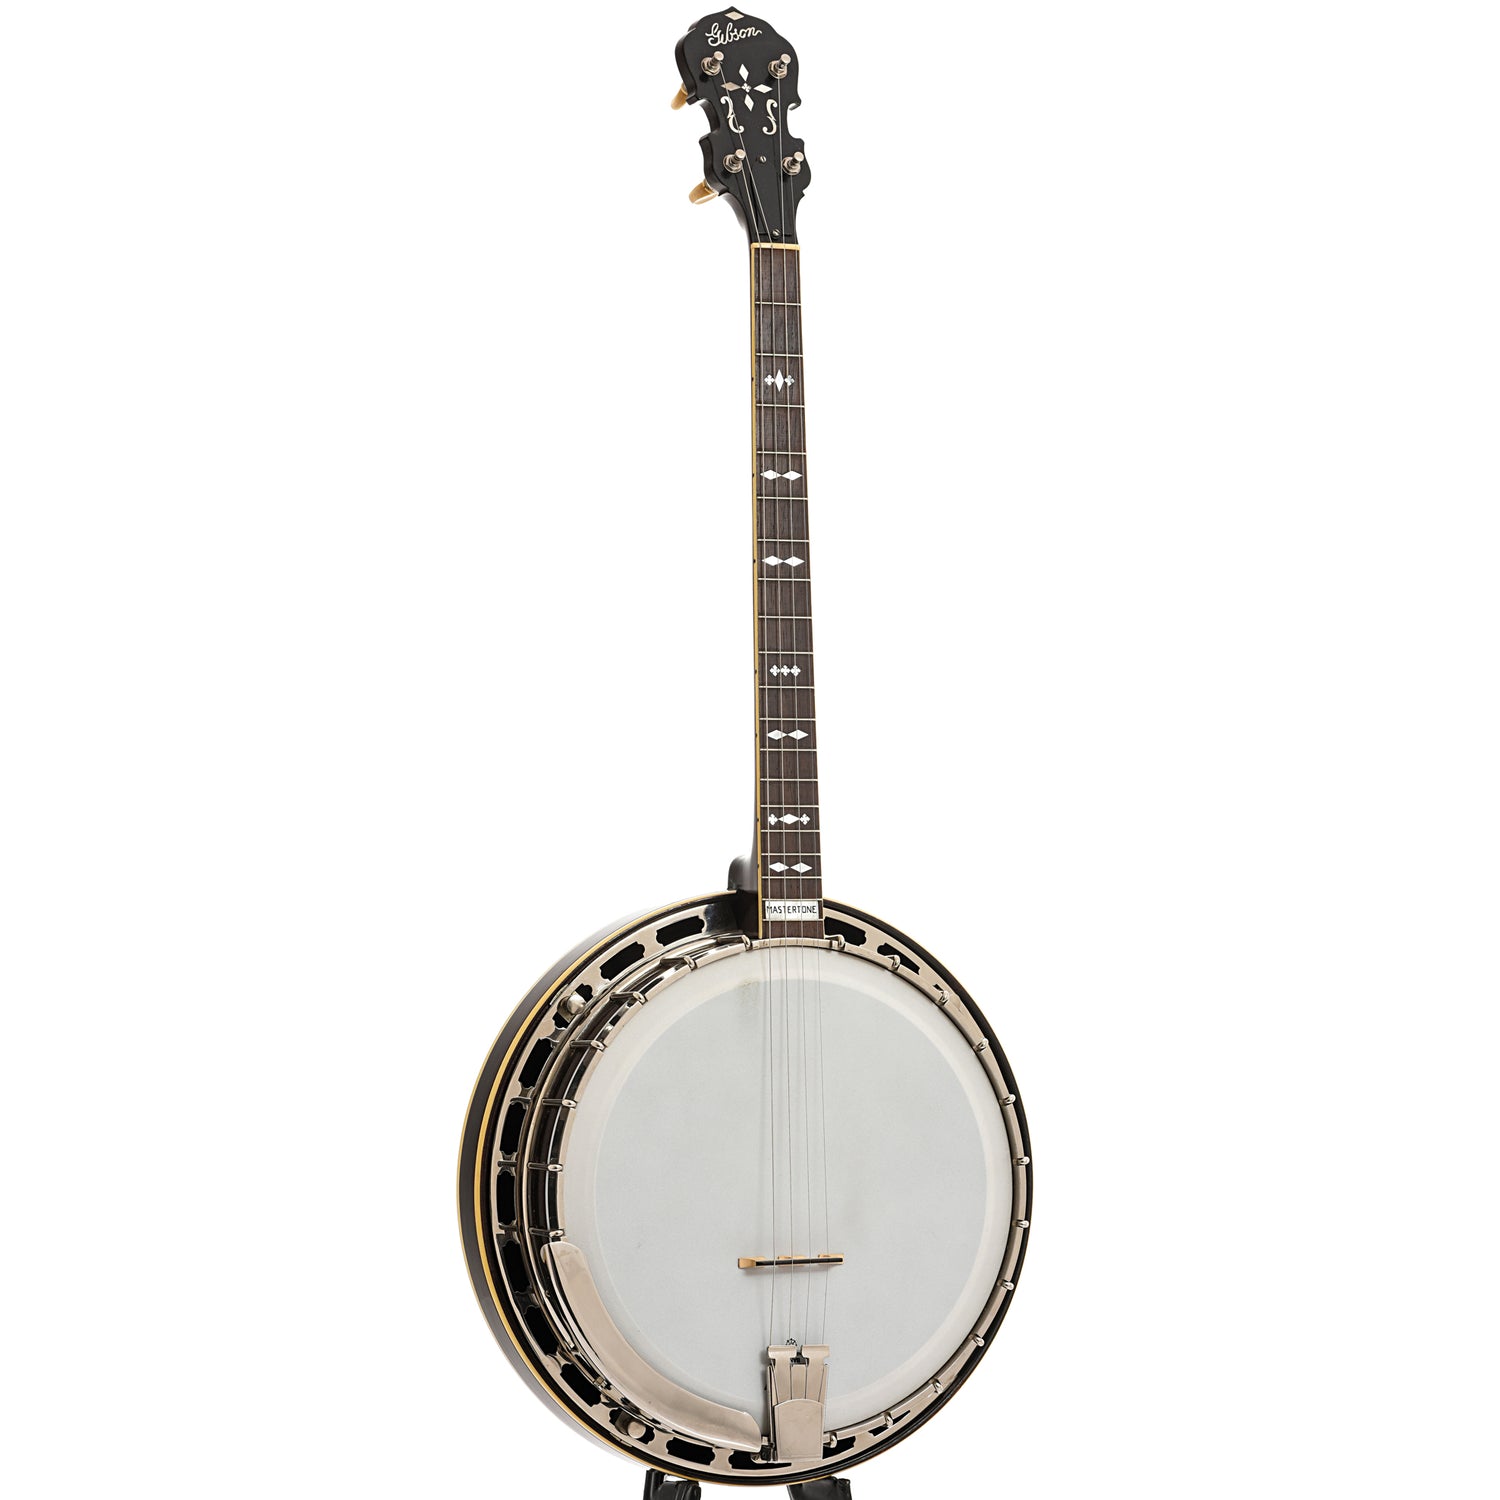 Full front and side of 1929 Gibson TB-3 Tenor Banjo